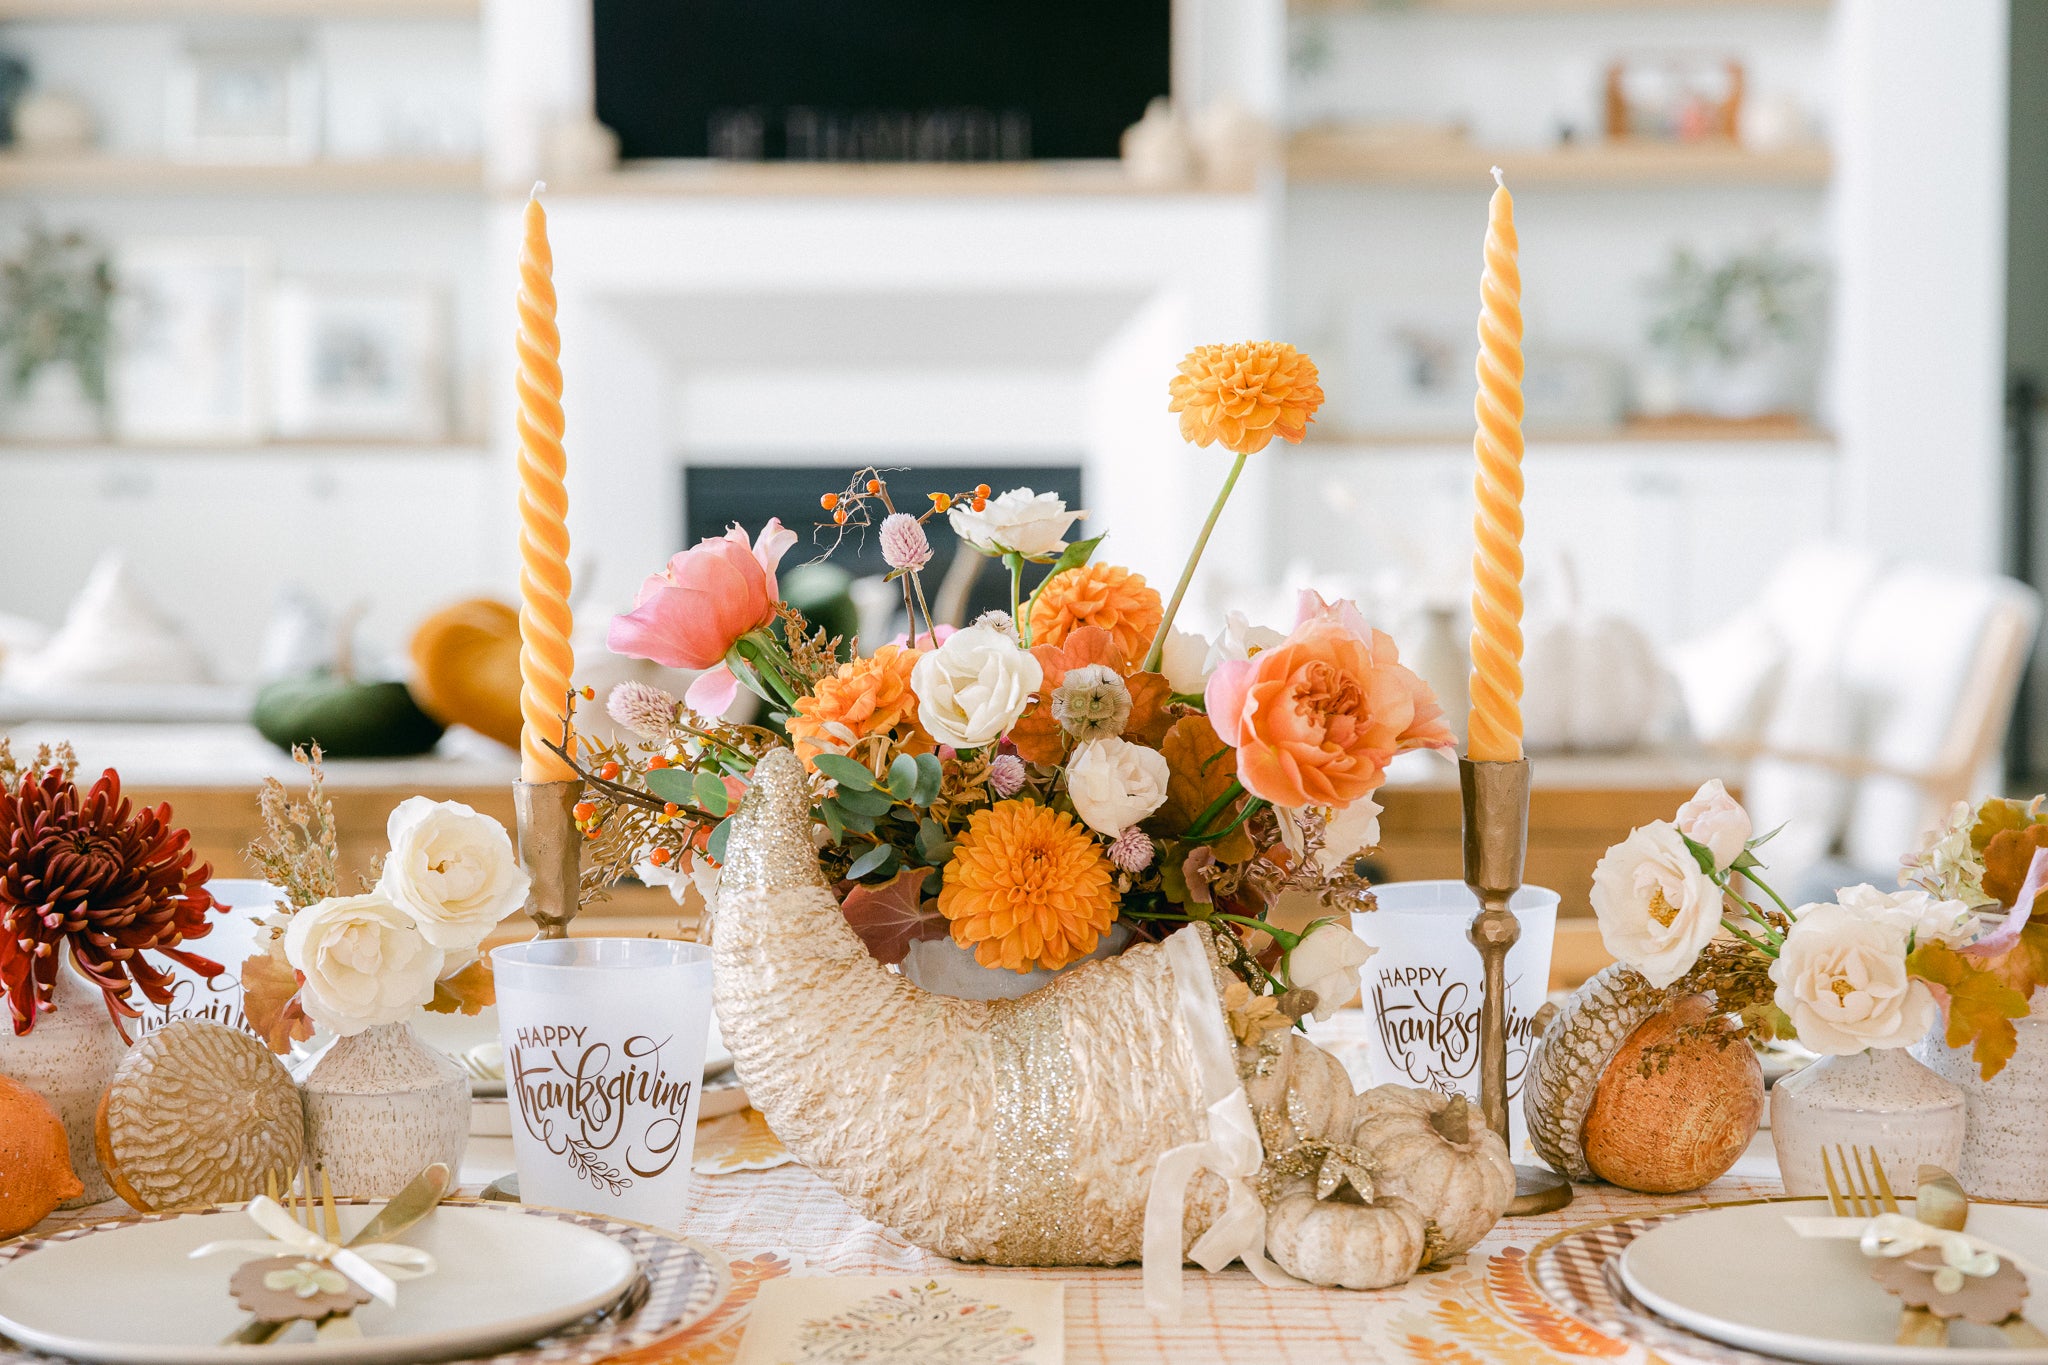 Thanksgiving table setting ideas at home.